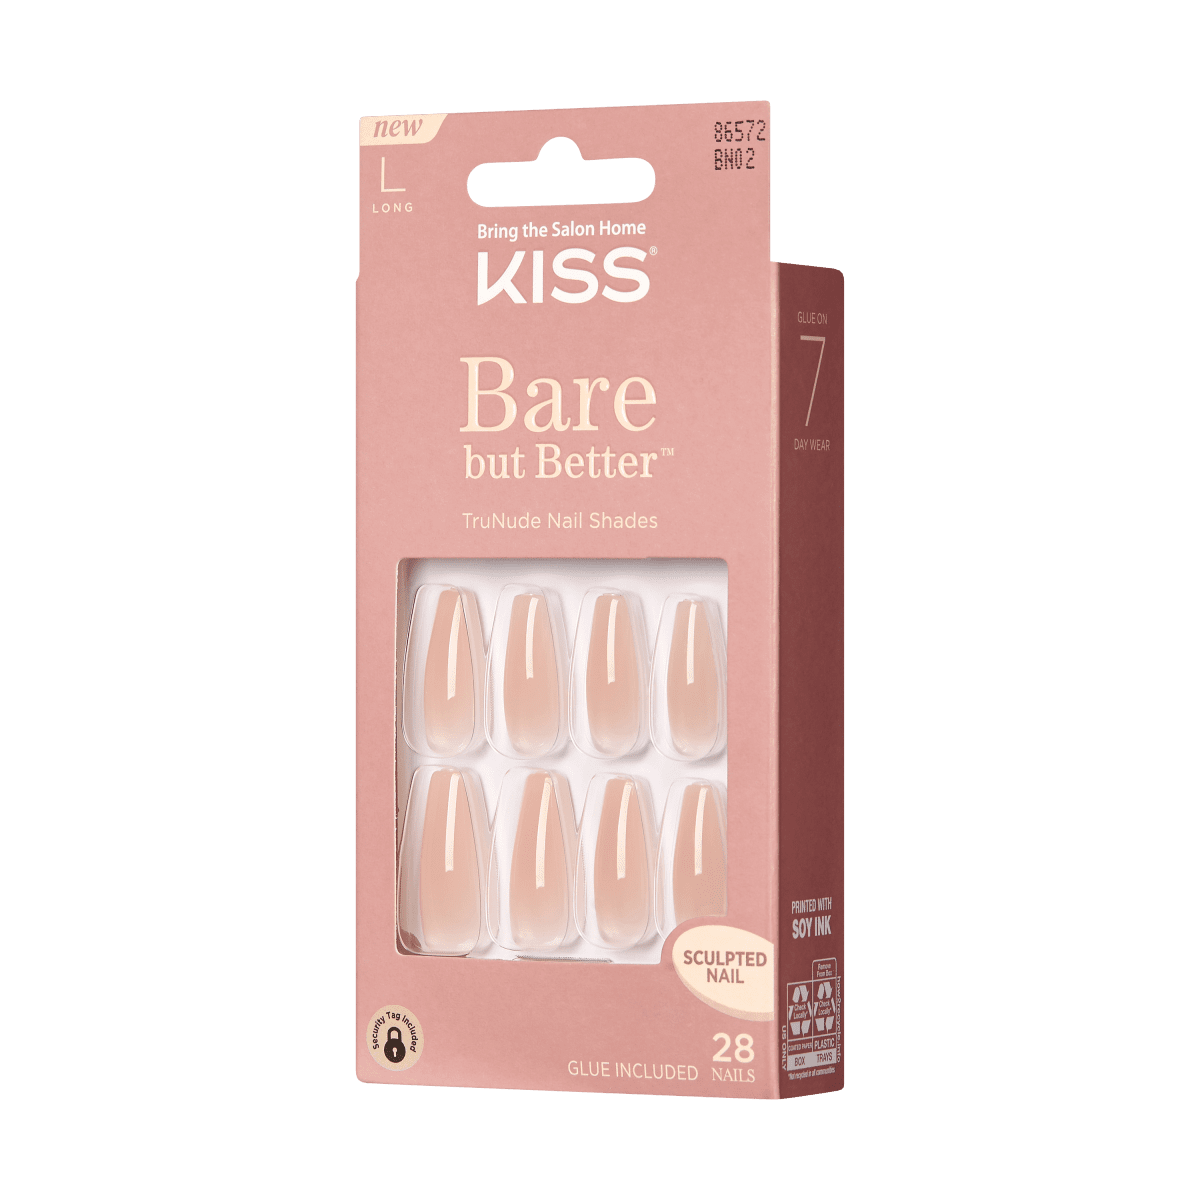 Kiss Bare-But-Better Nails - Nude Drama, 0.07 Oz (BN02)